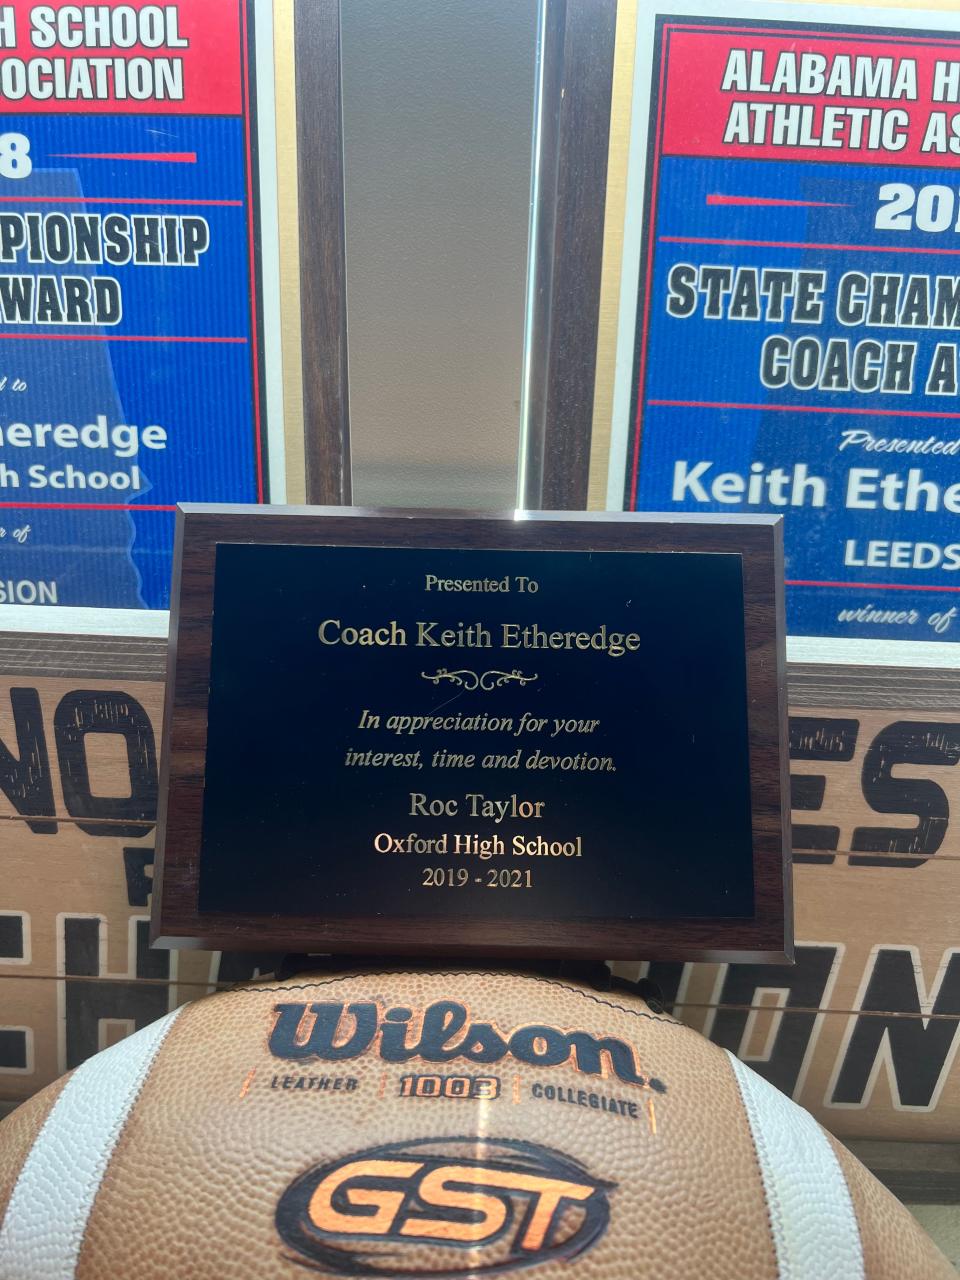 A plaque given by Memphis football wide receiver Roc Taylor to his high school coach, Keith Etheredge.